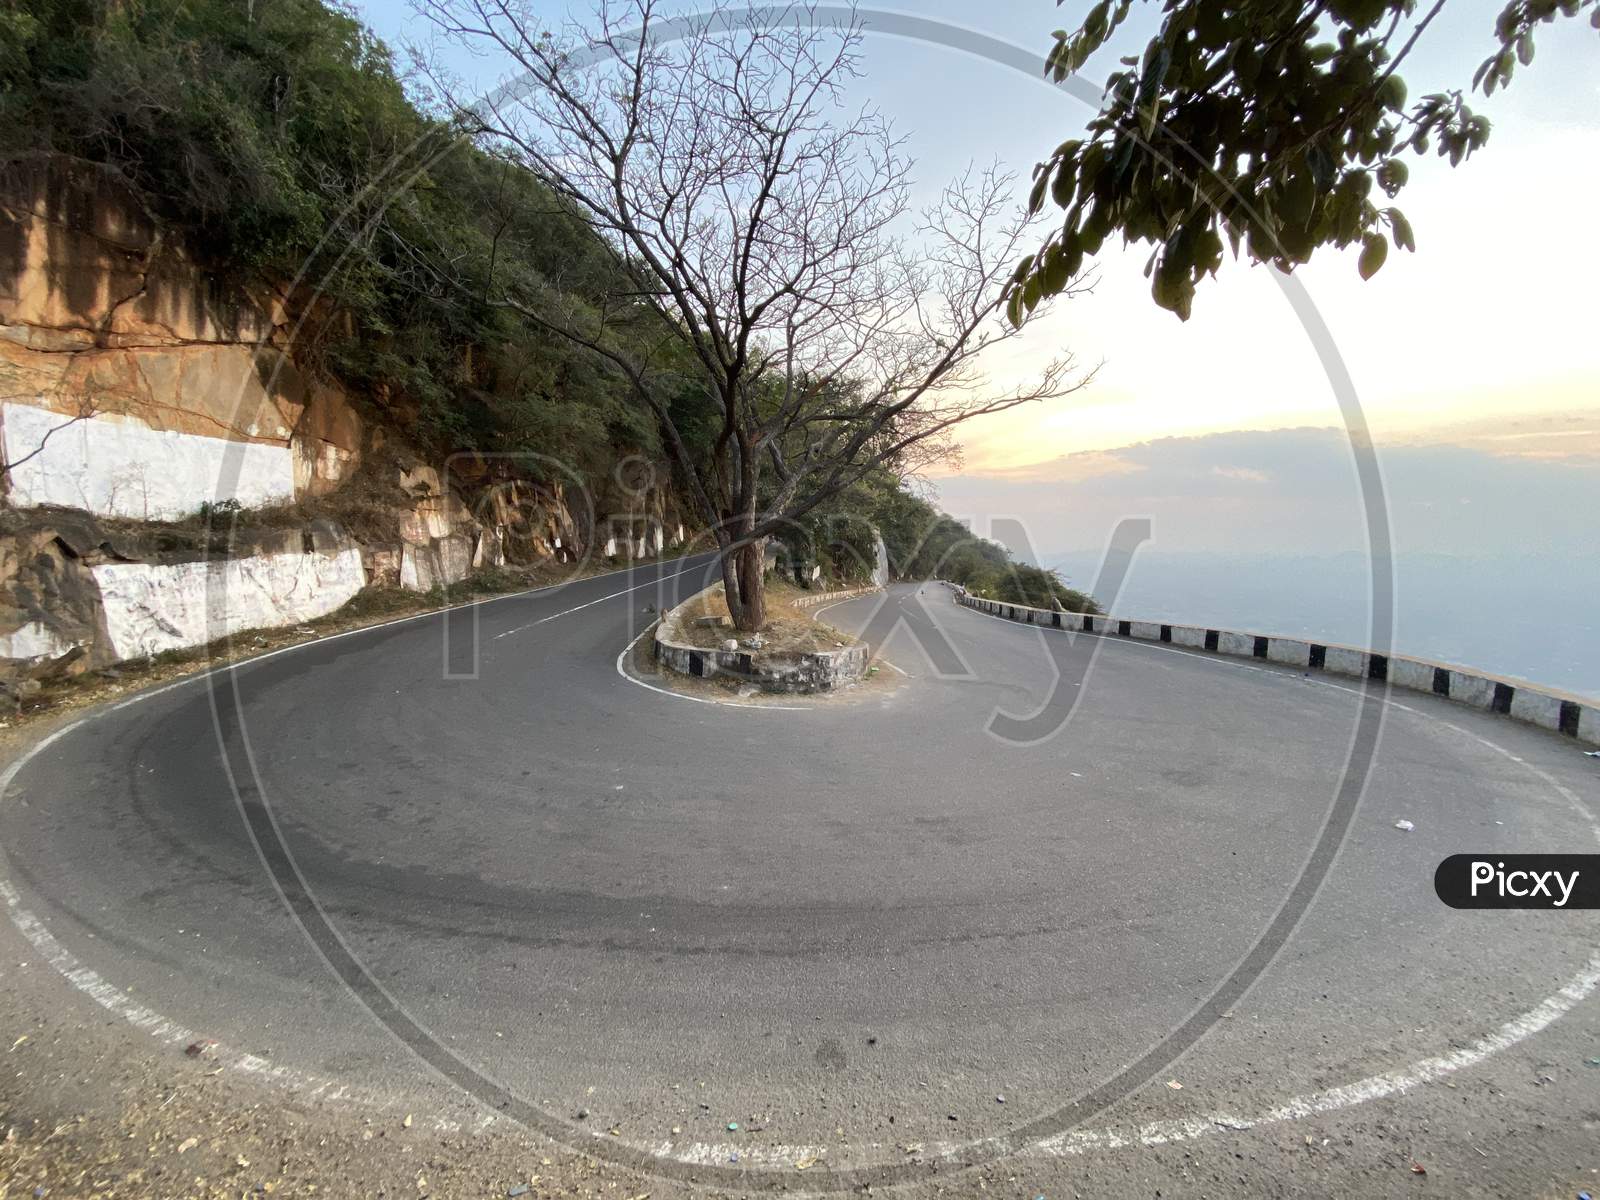 View of the curve of ghat road